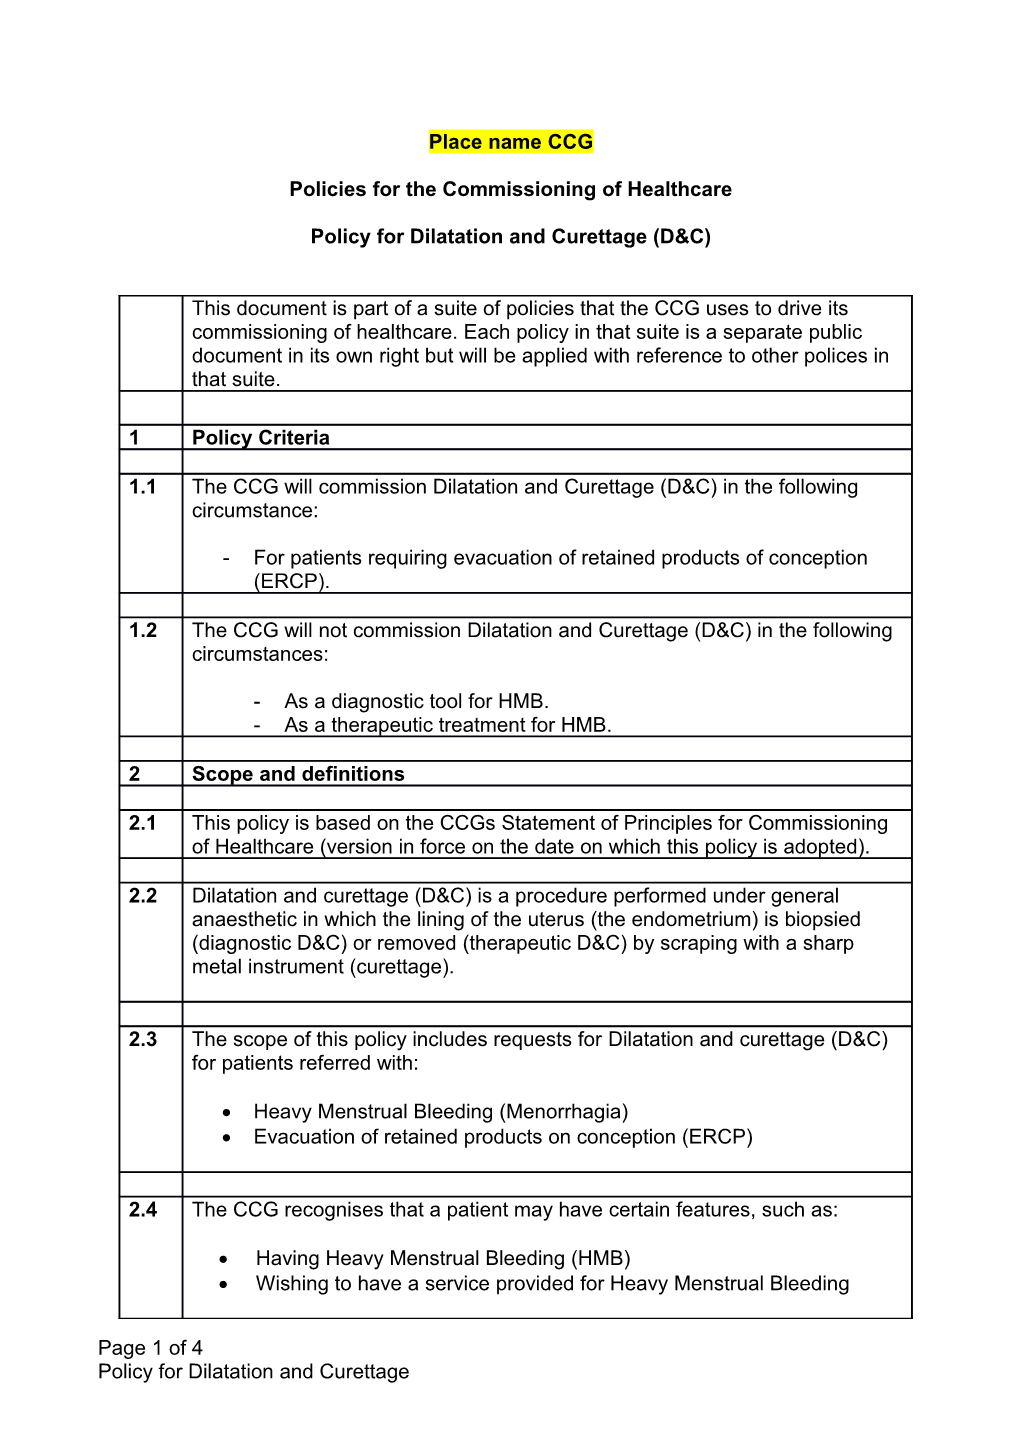 Policies for the Commissioning of Healthcare